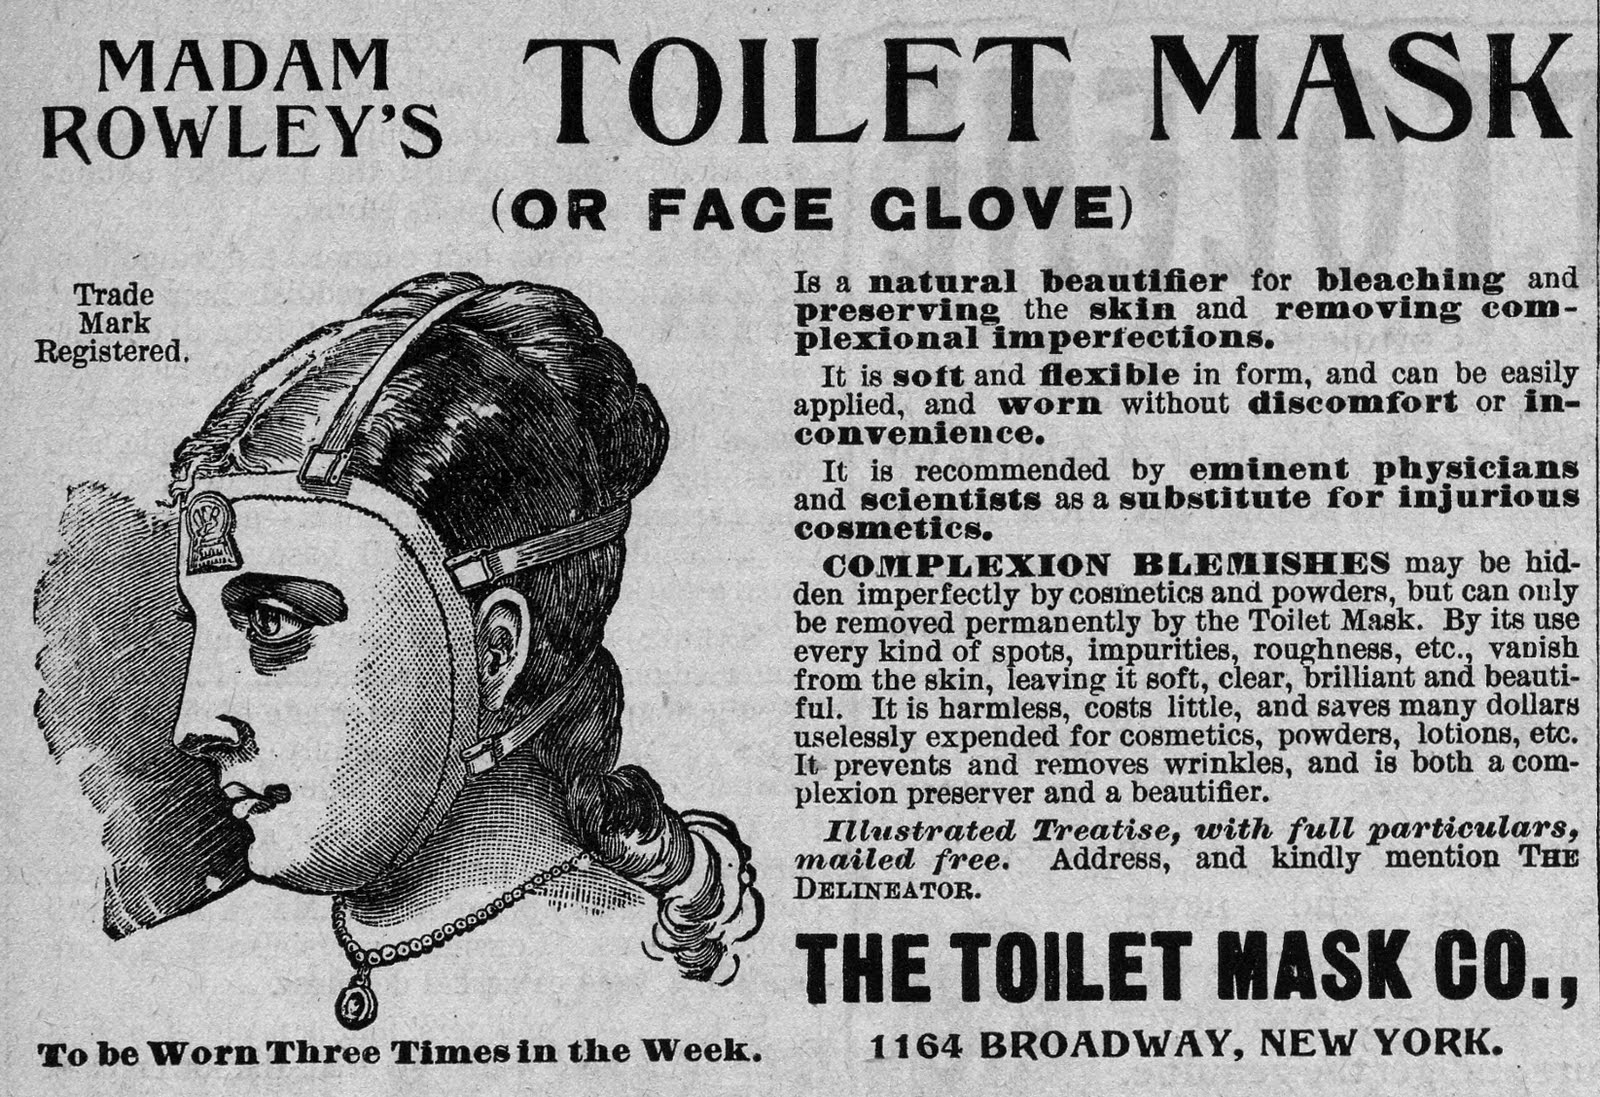 Madame Rowley's Toilet Mask,This late 19th century beauty treatment seems ridiculous and, on top of that, it's terrifying